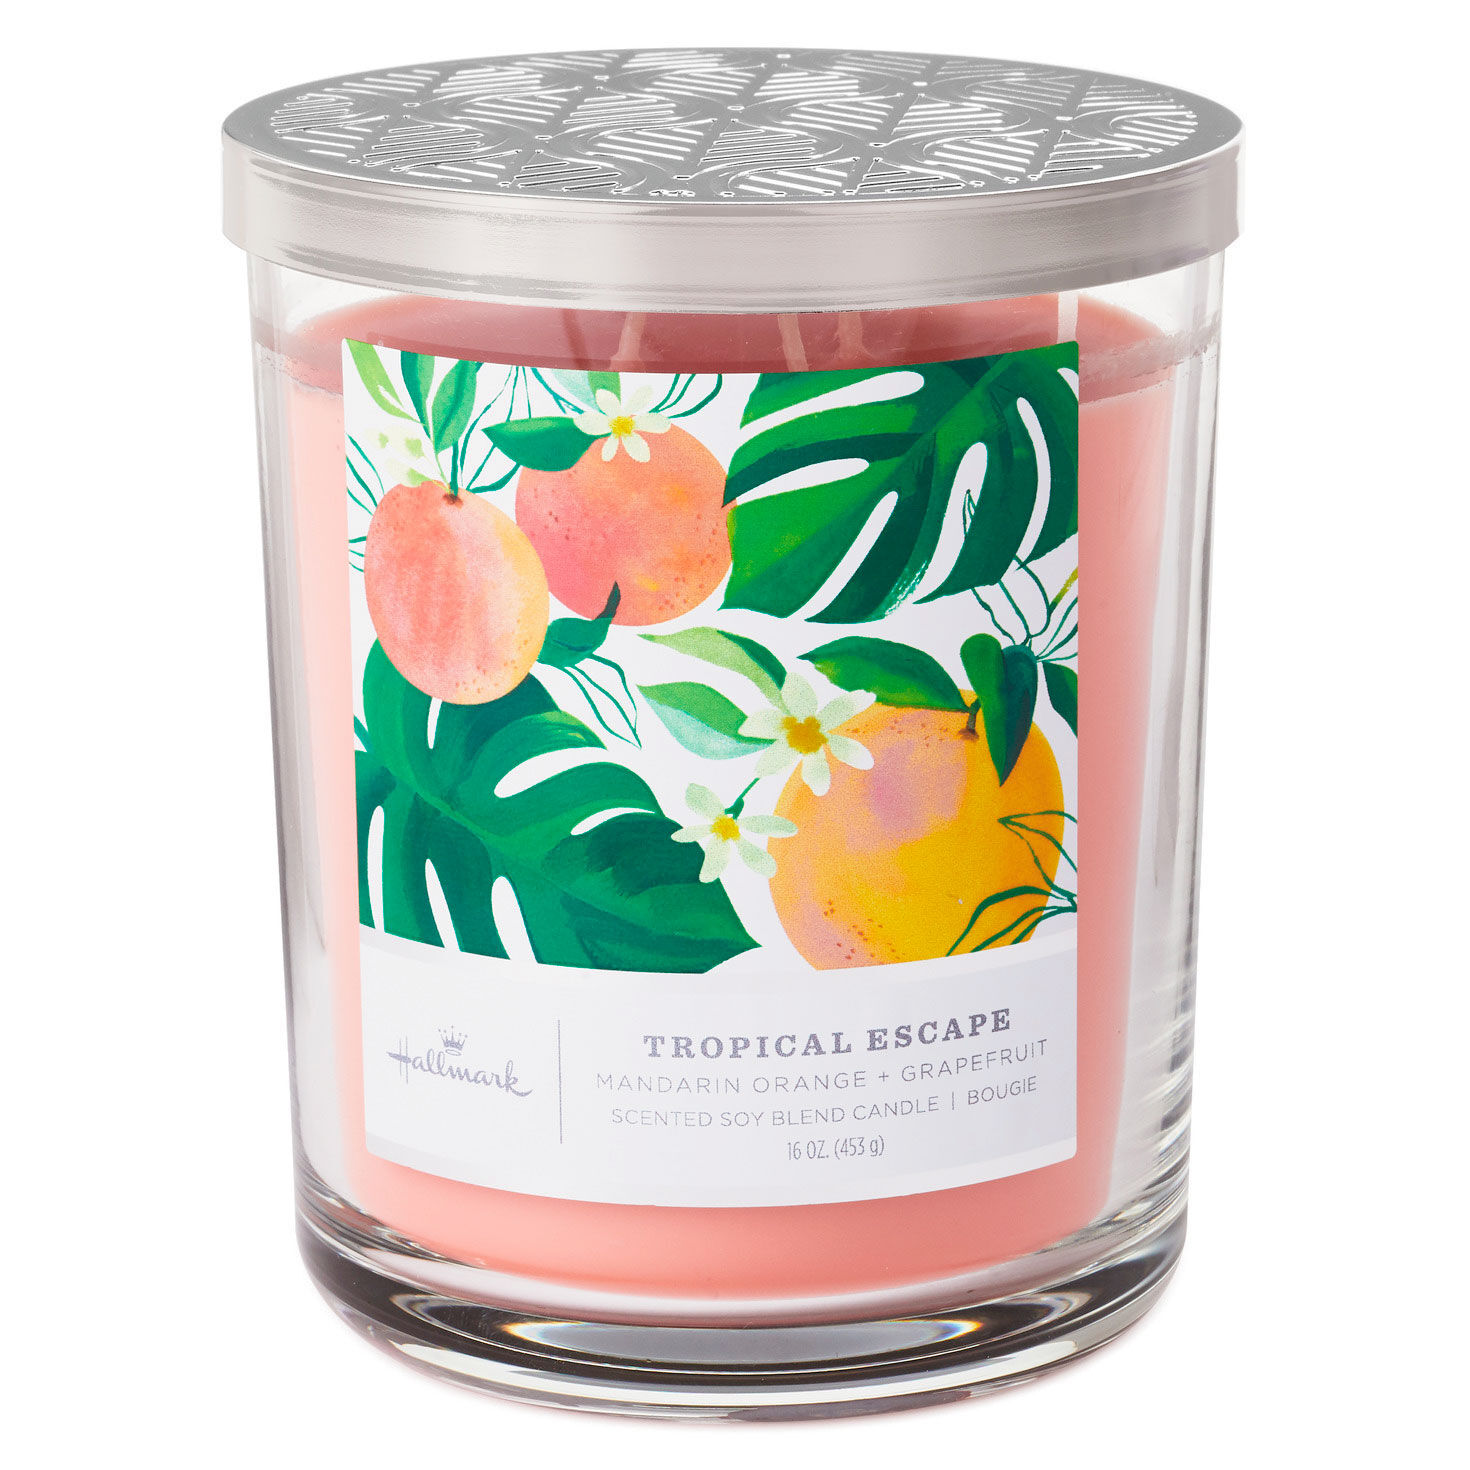 2 Bath & Body Works SEASIDE ESCAPE 3-Wick Filled Candle 14.5 oz 